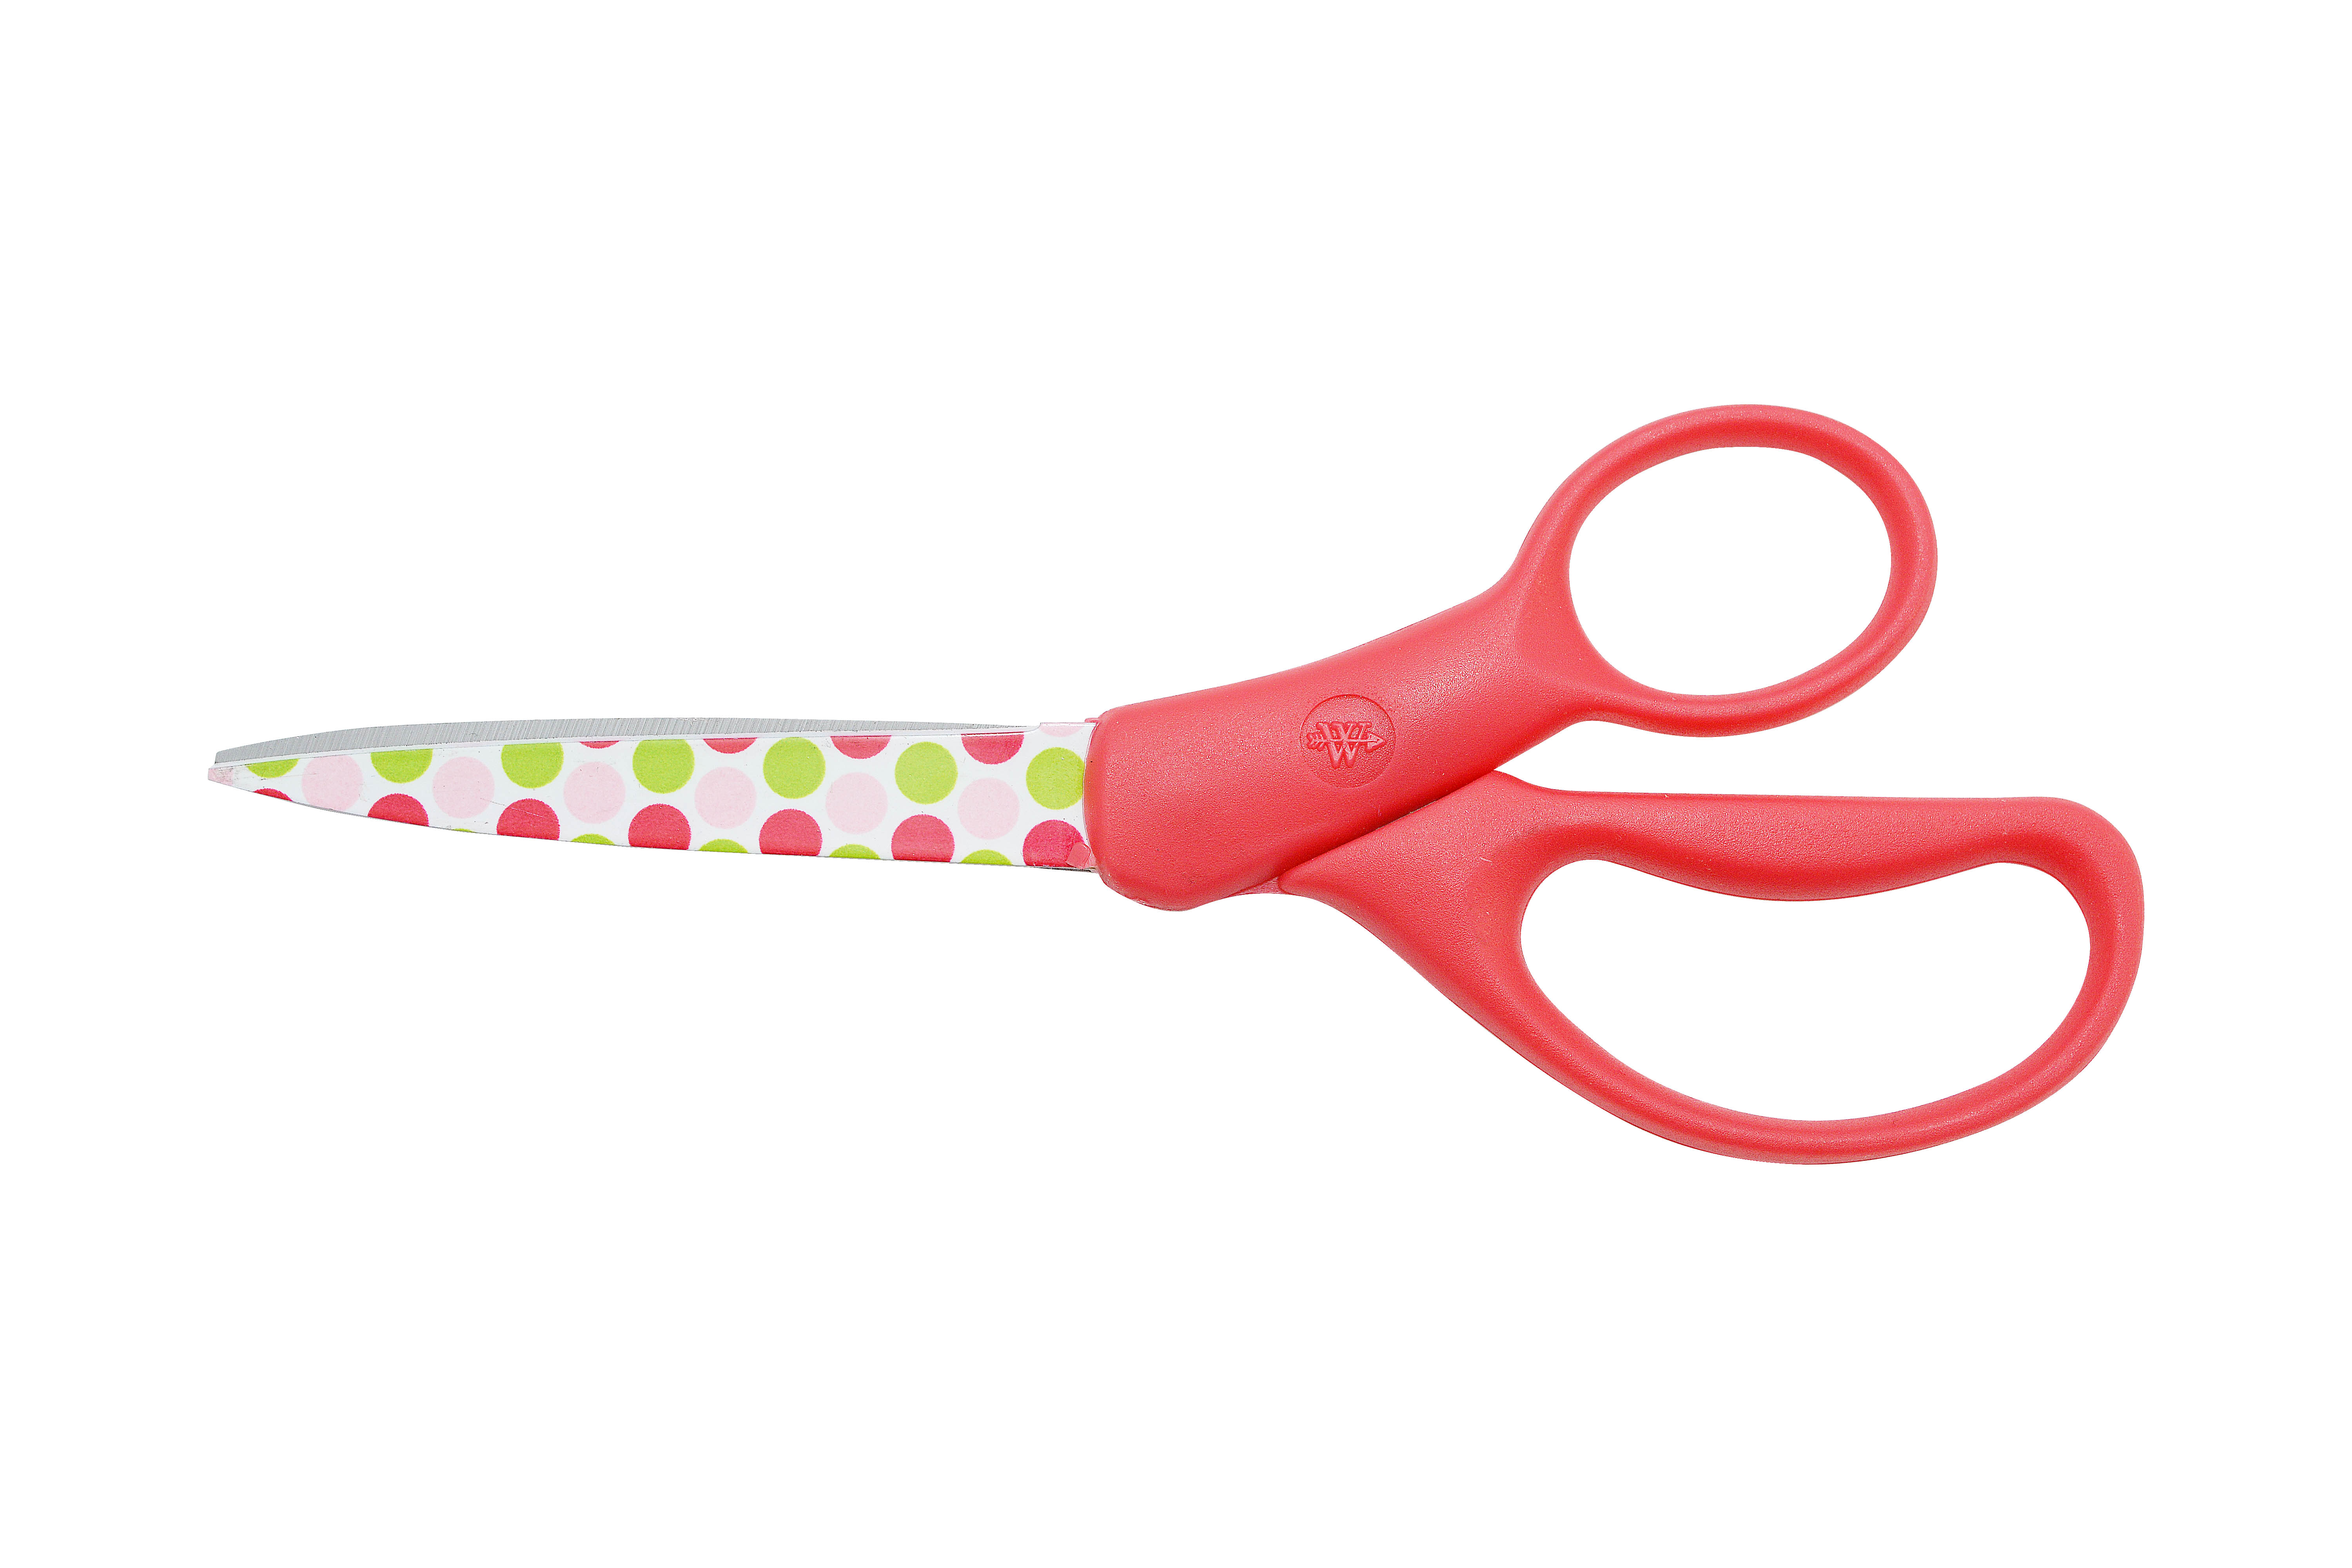 Westcott 8 Inch Straight Holidazed Scissors - Red Handle, Dots (16175)